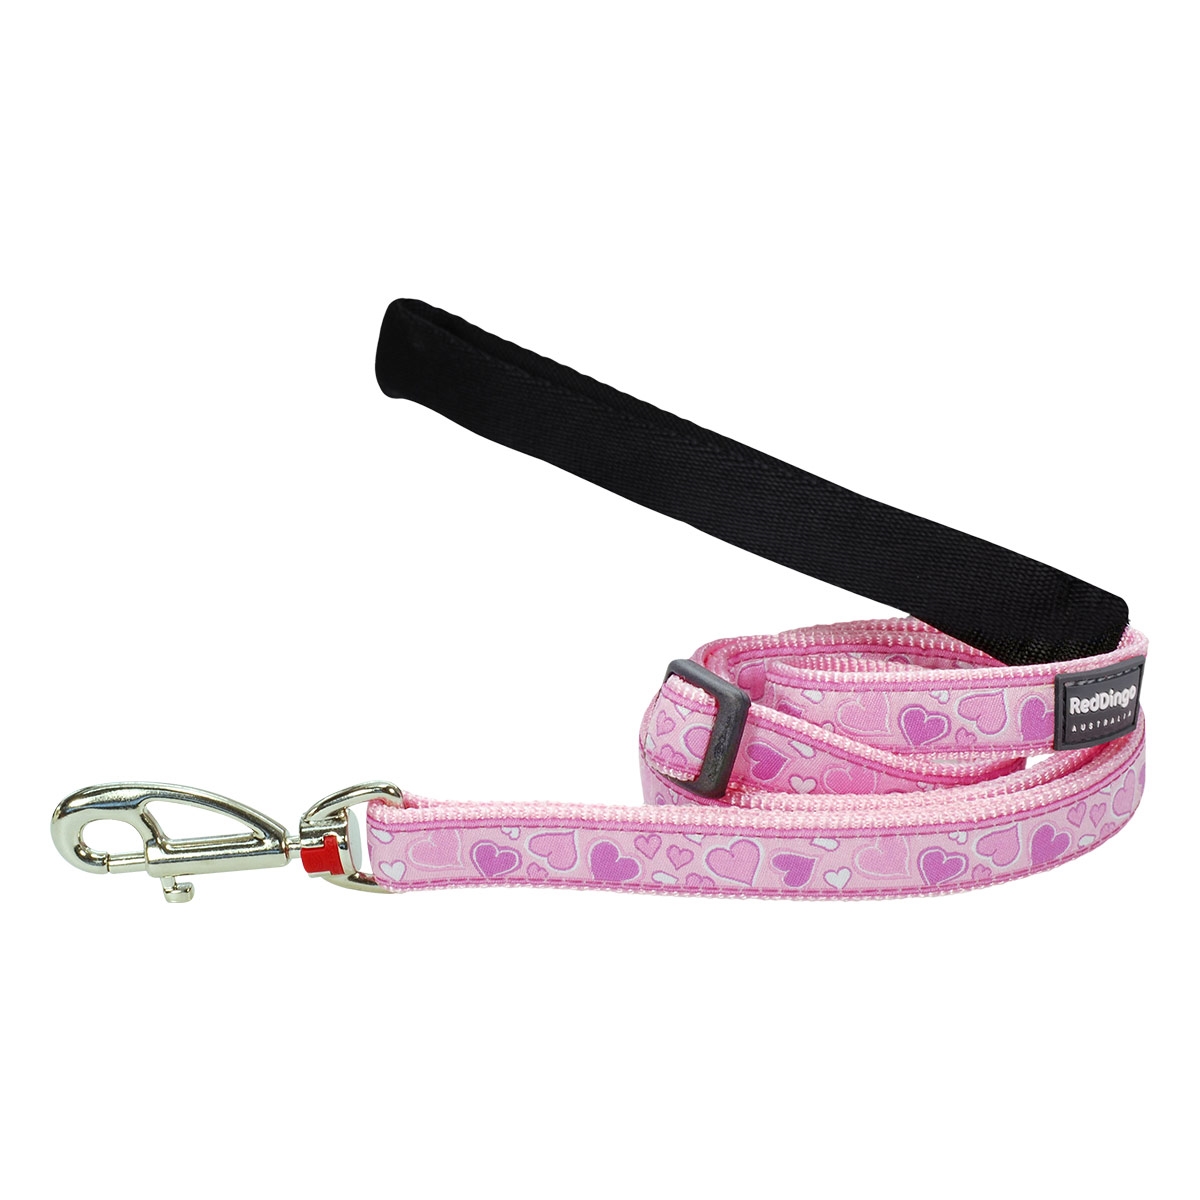 Picture of Red Dingo L6-BZ-PK-15 Dog Lead Design Breezy Love Pink - Small 6ft